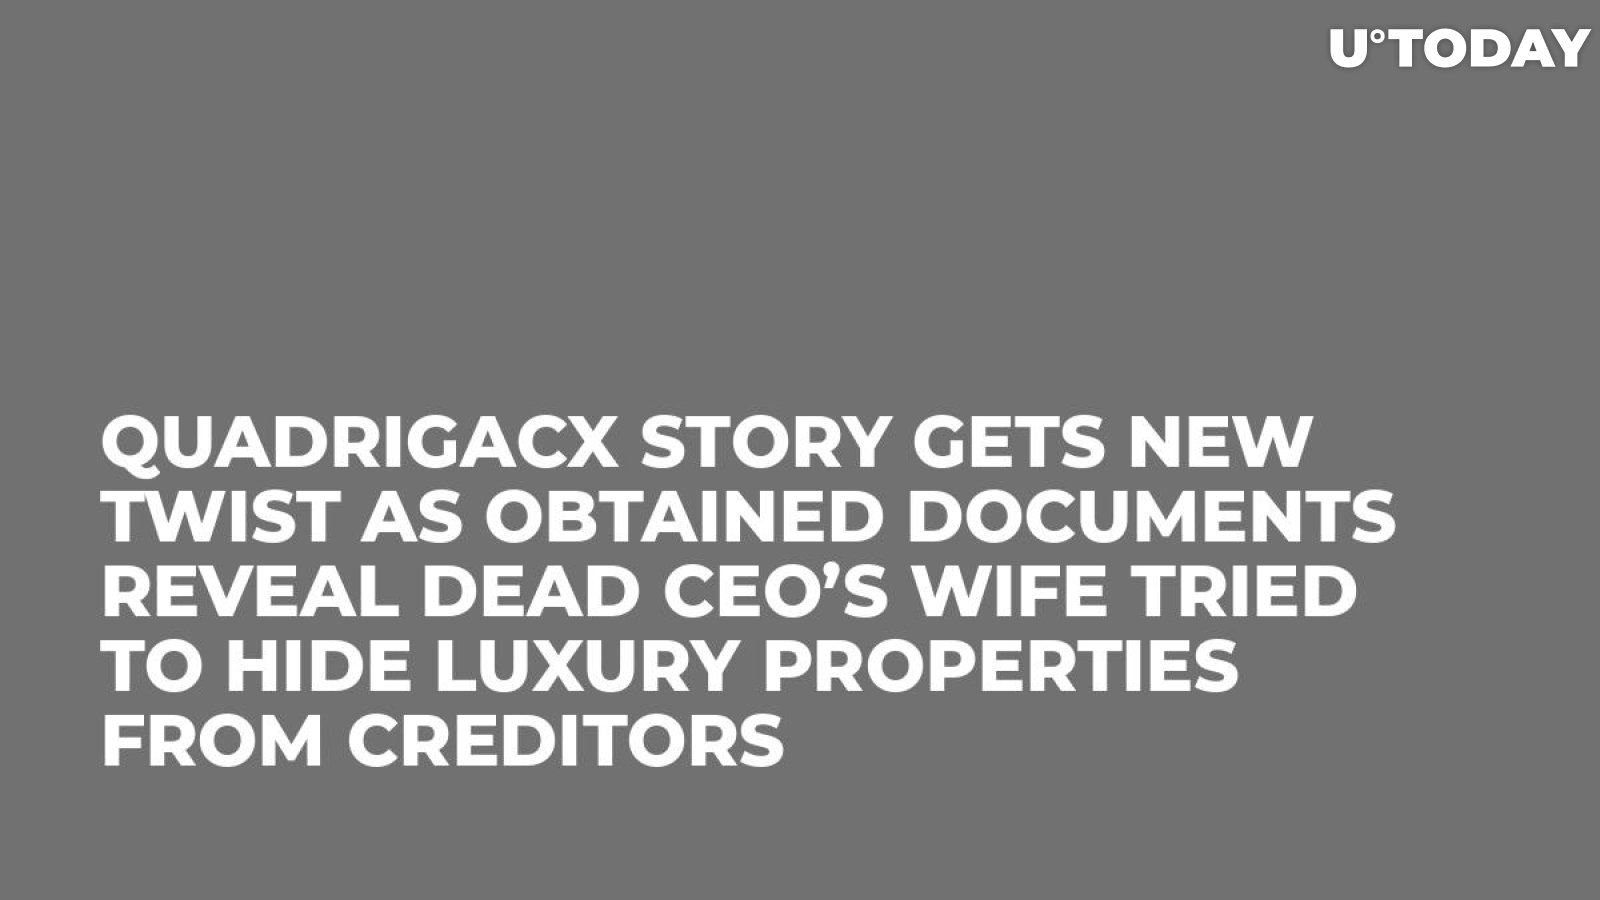 QuadrigaCX Story Gets New Twist as Obtained Documents Reveal Dead CEO’s Wife Tried to Hide Luxury Properties from Creditors